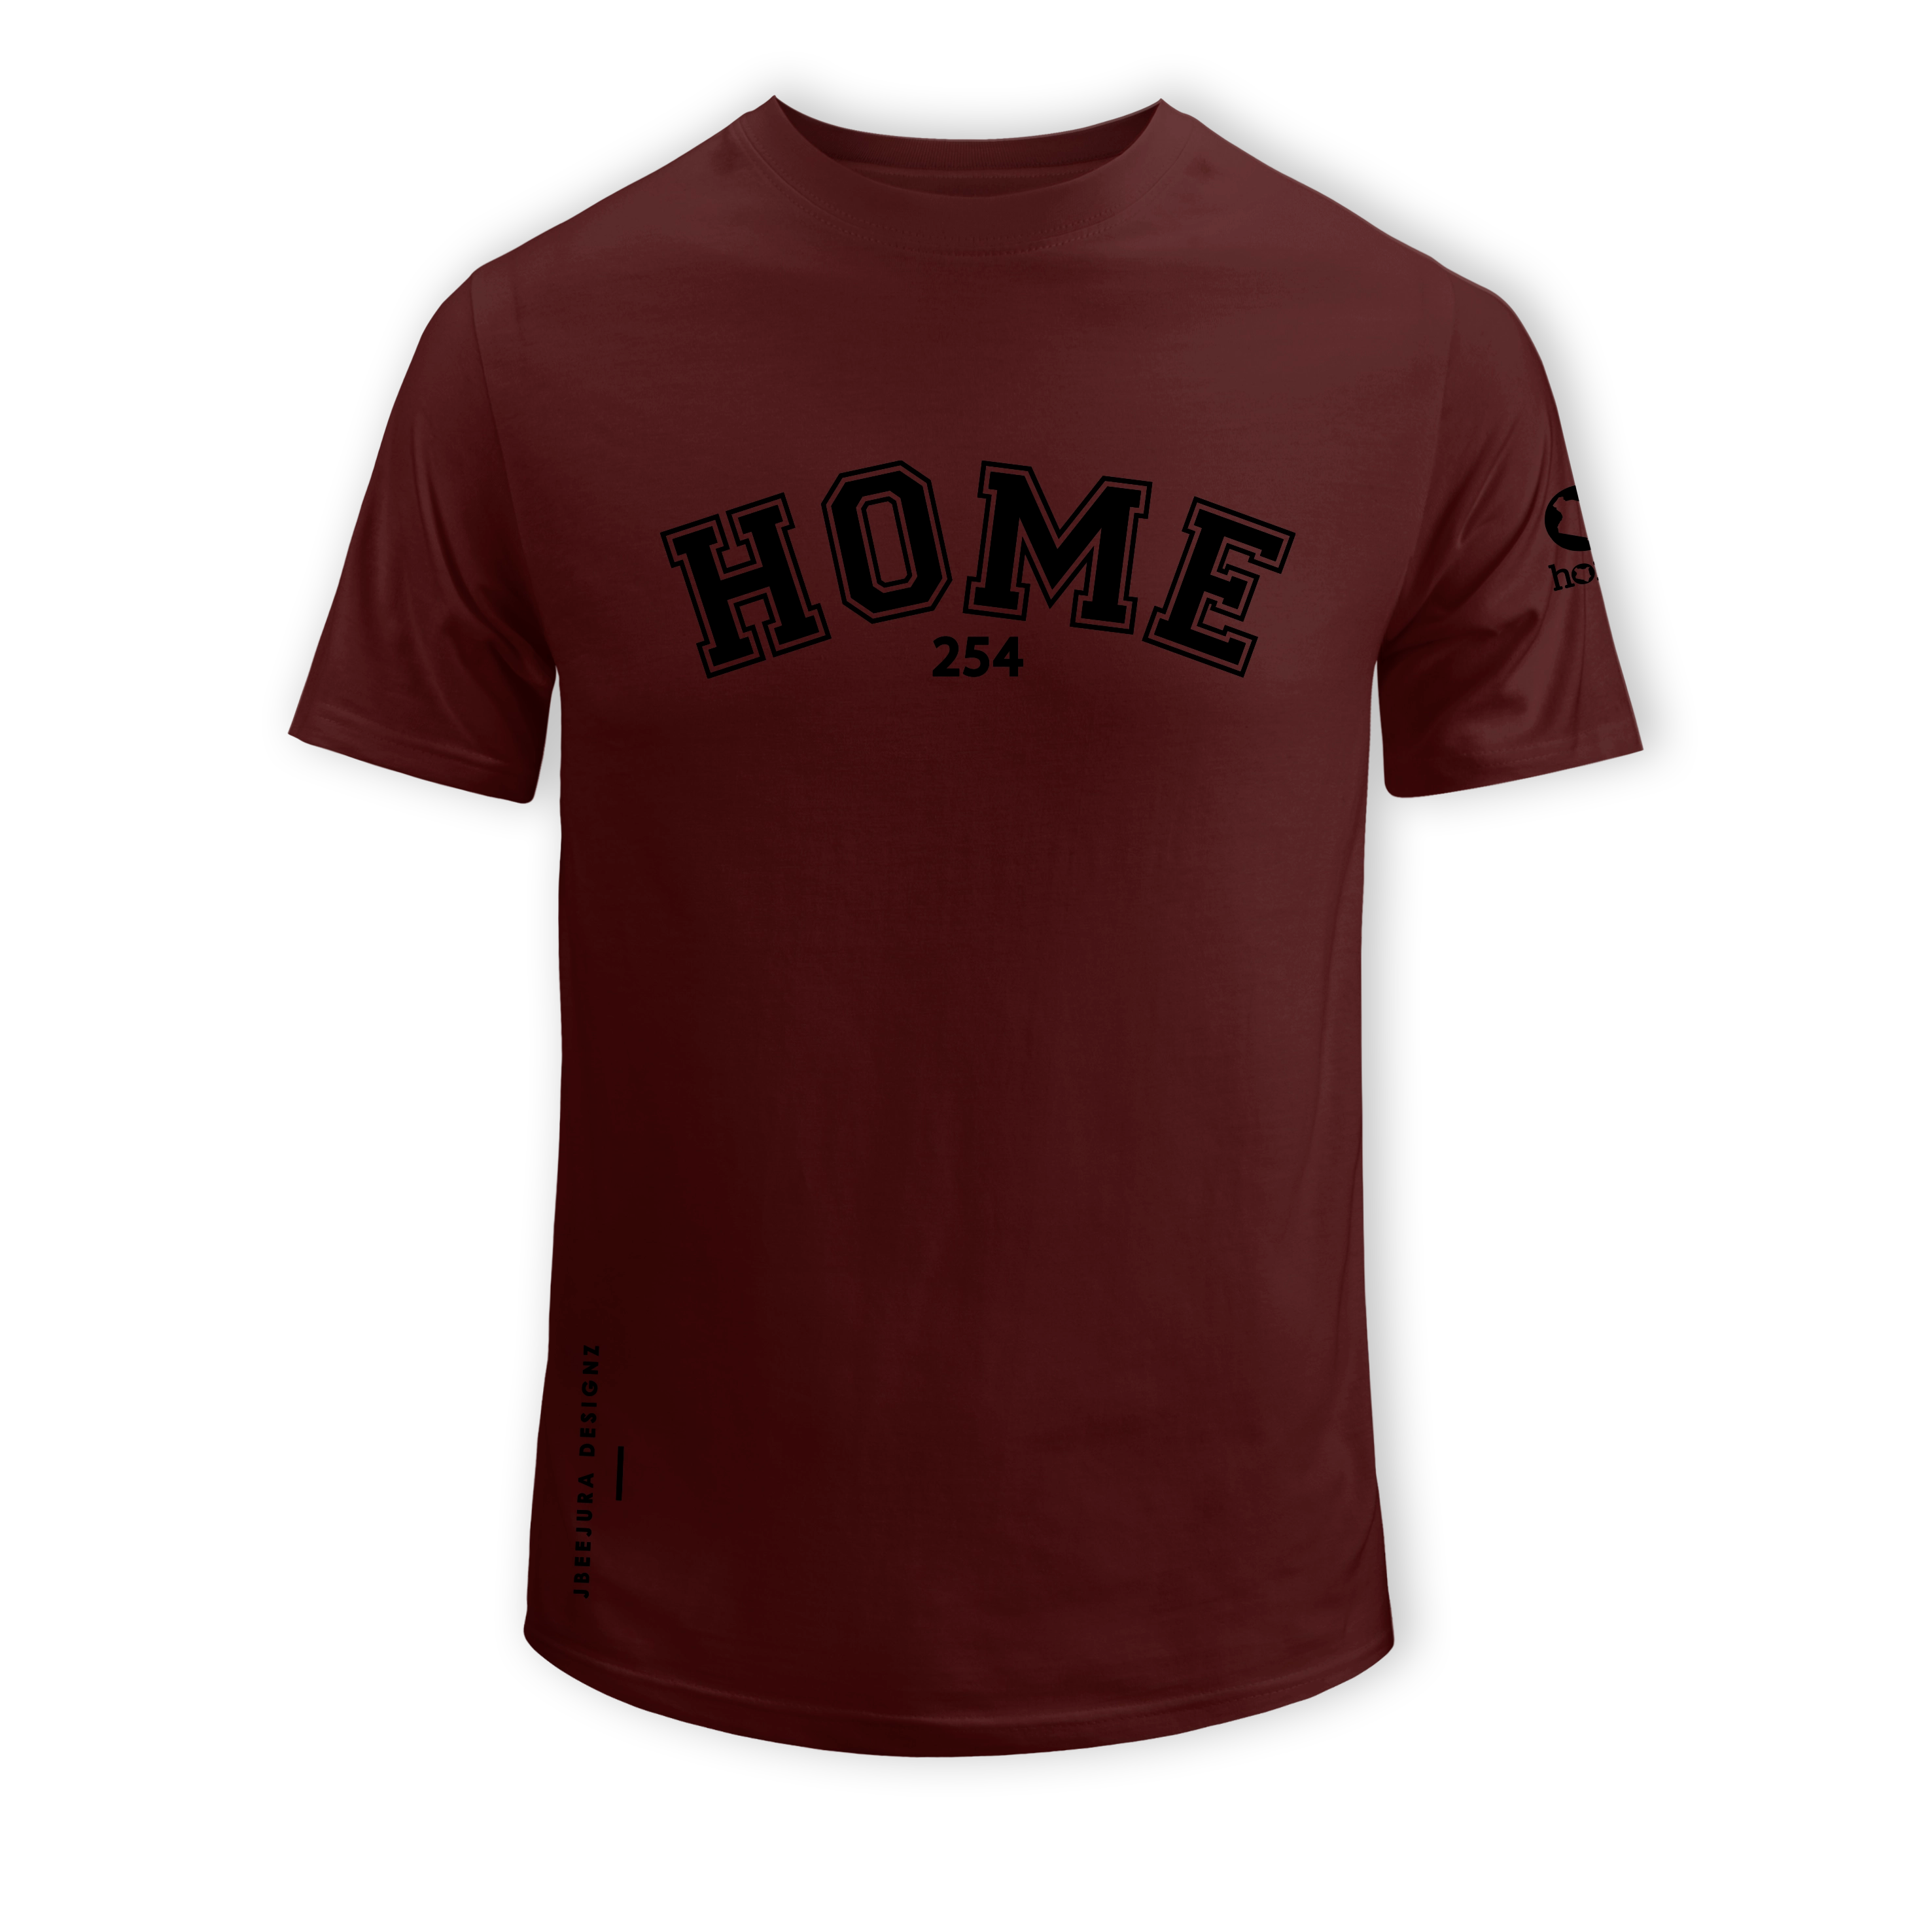 : home_254 SHORT-SLEEVED MAROON T-SHIRT WITH A BLACK COLLEGE PRINT – COTTON PLUS FABRIC